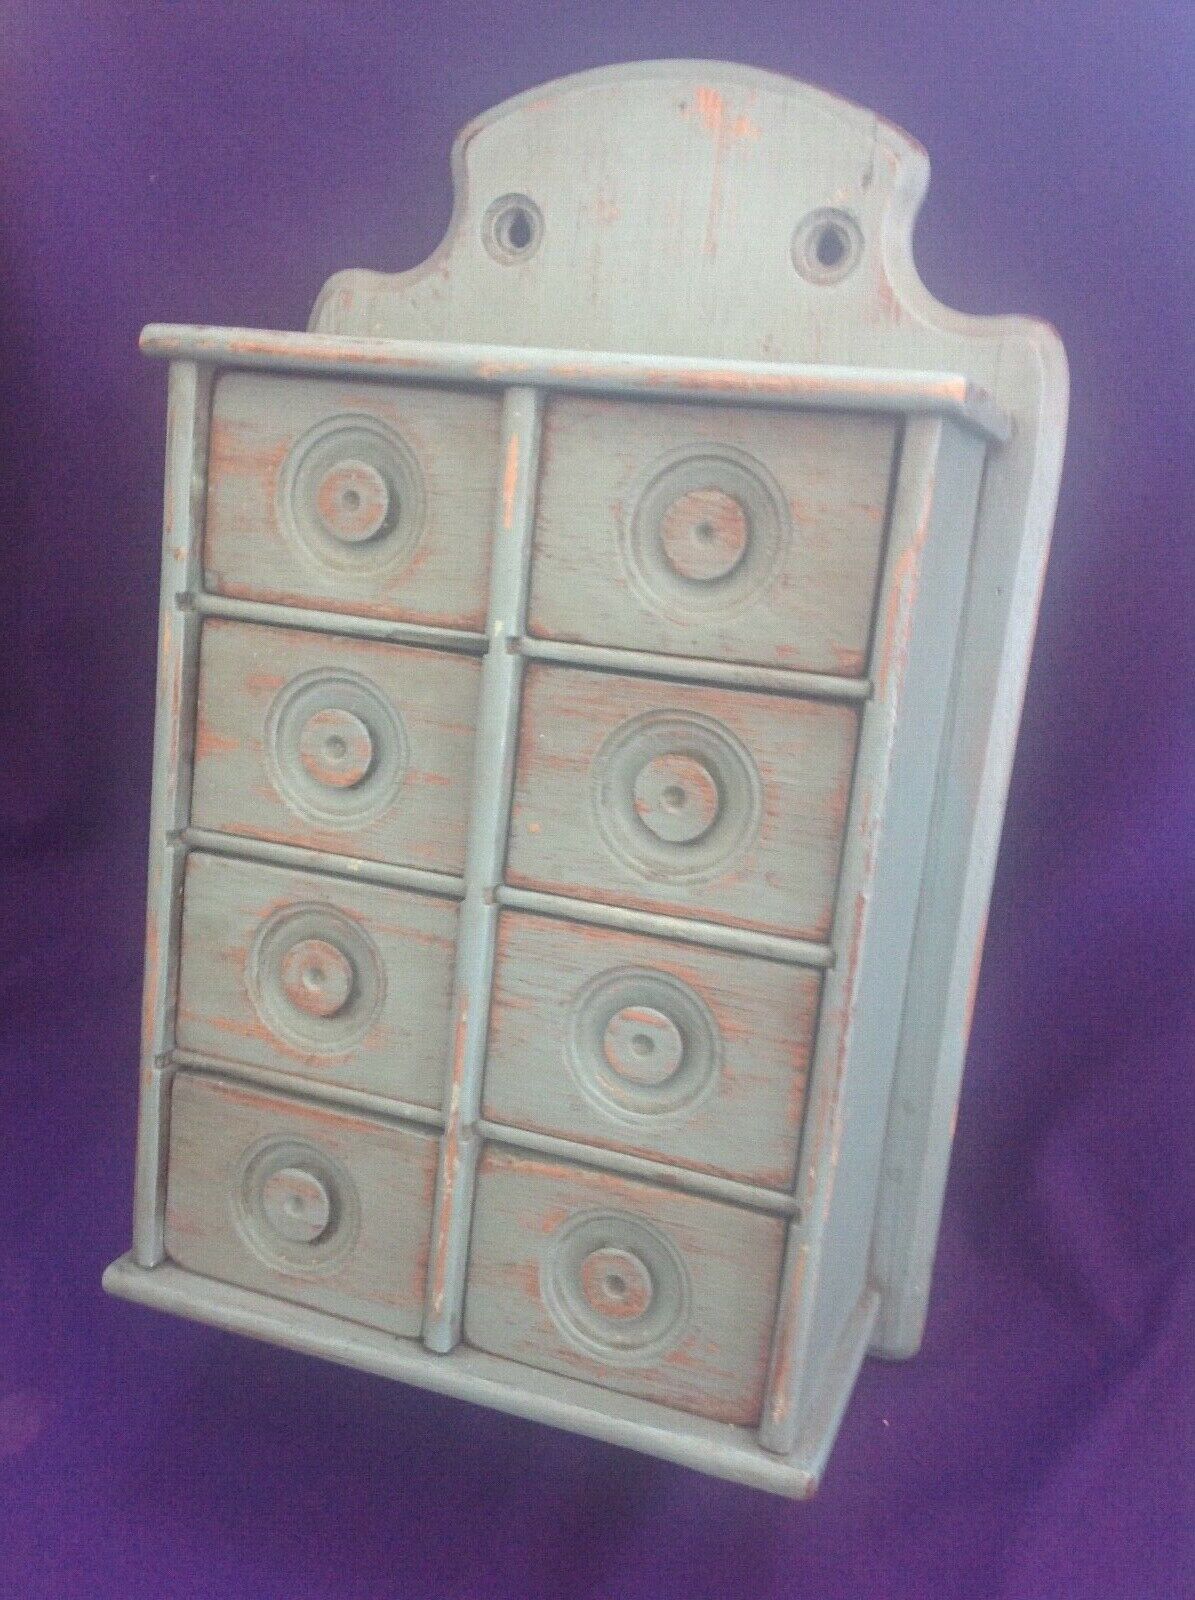 ANTIQUE HANGING WOODEN WALL BOX 8 DRAWER SPICE CABINET IN BLUE PAINT